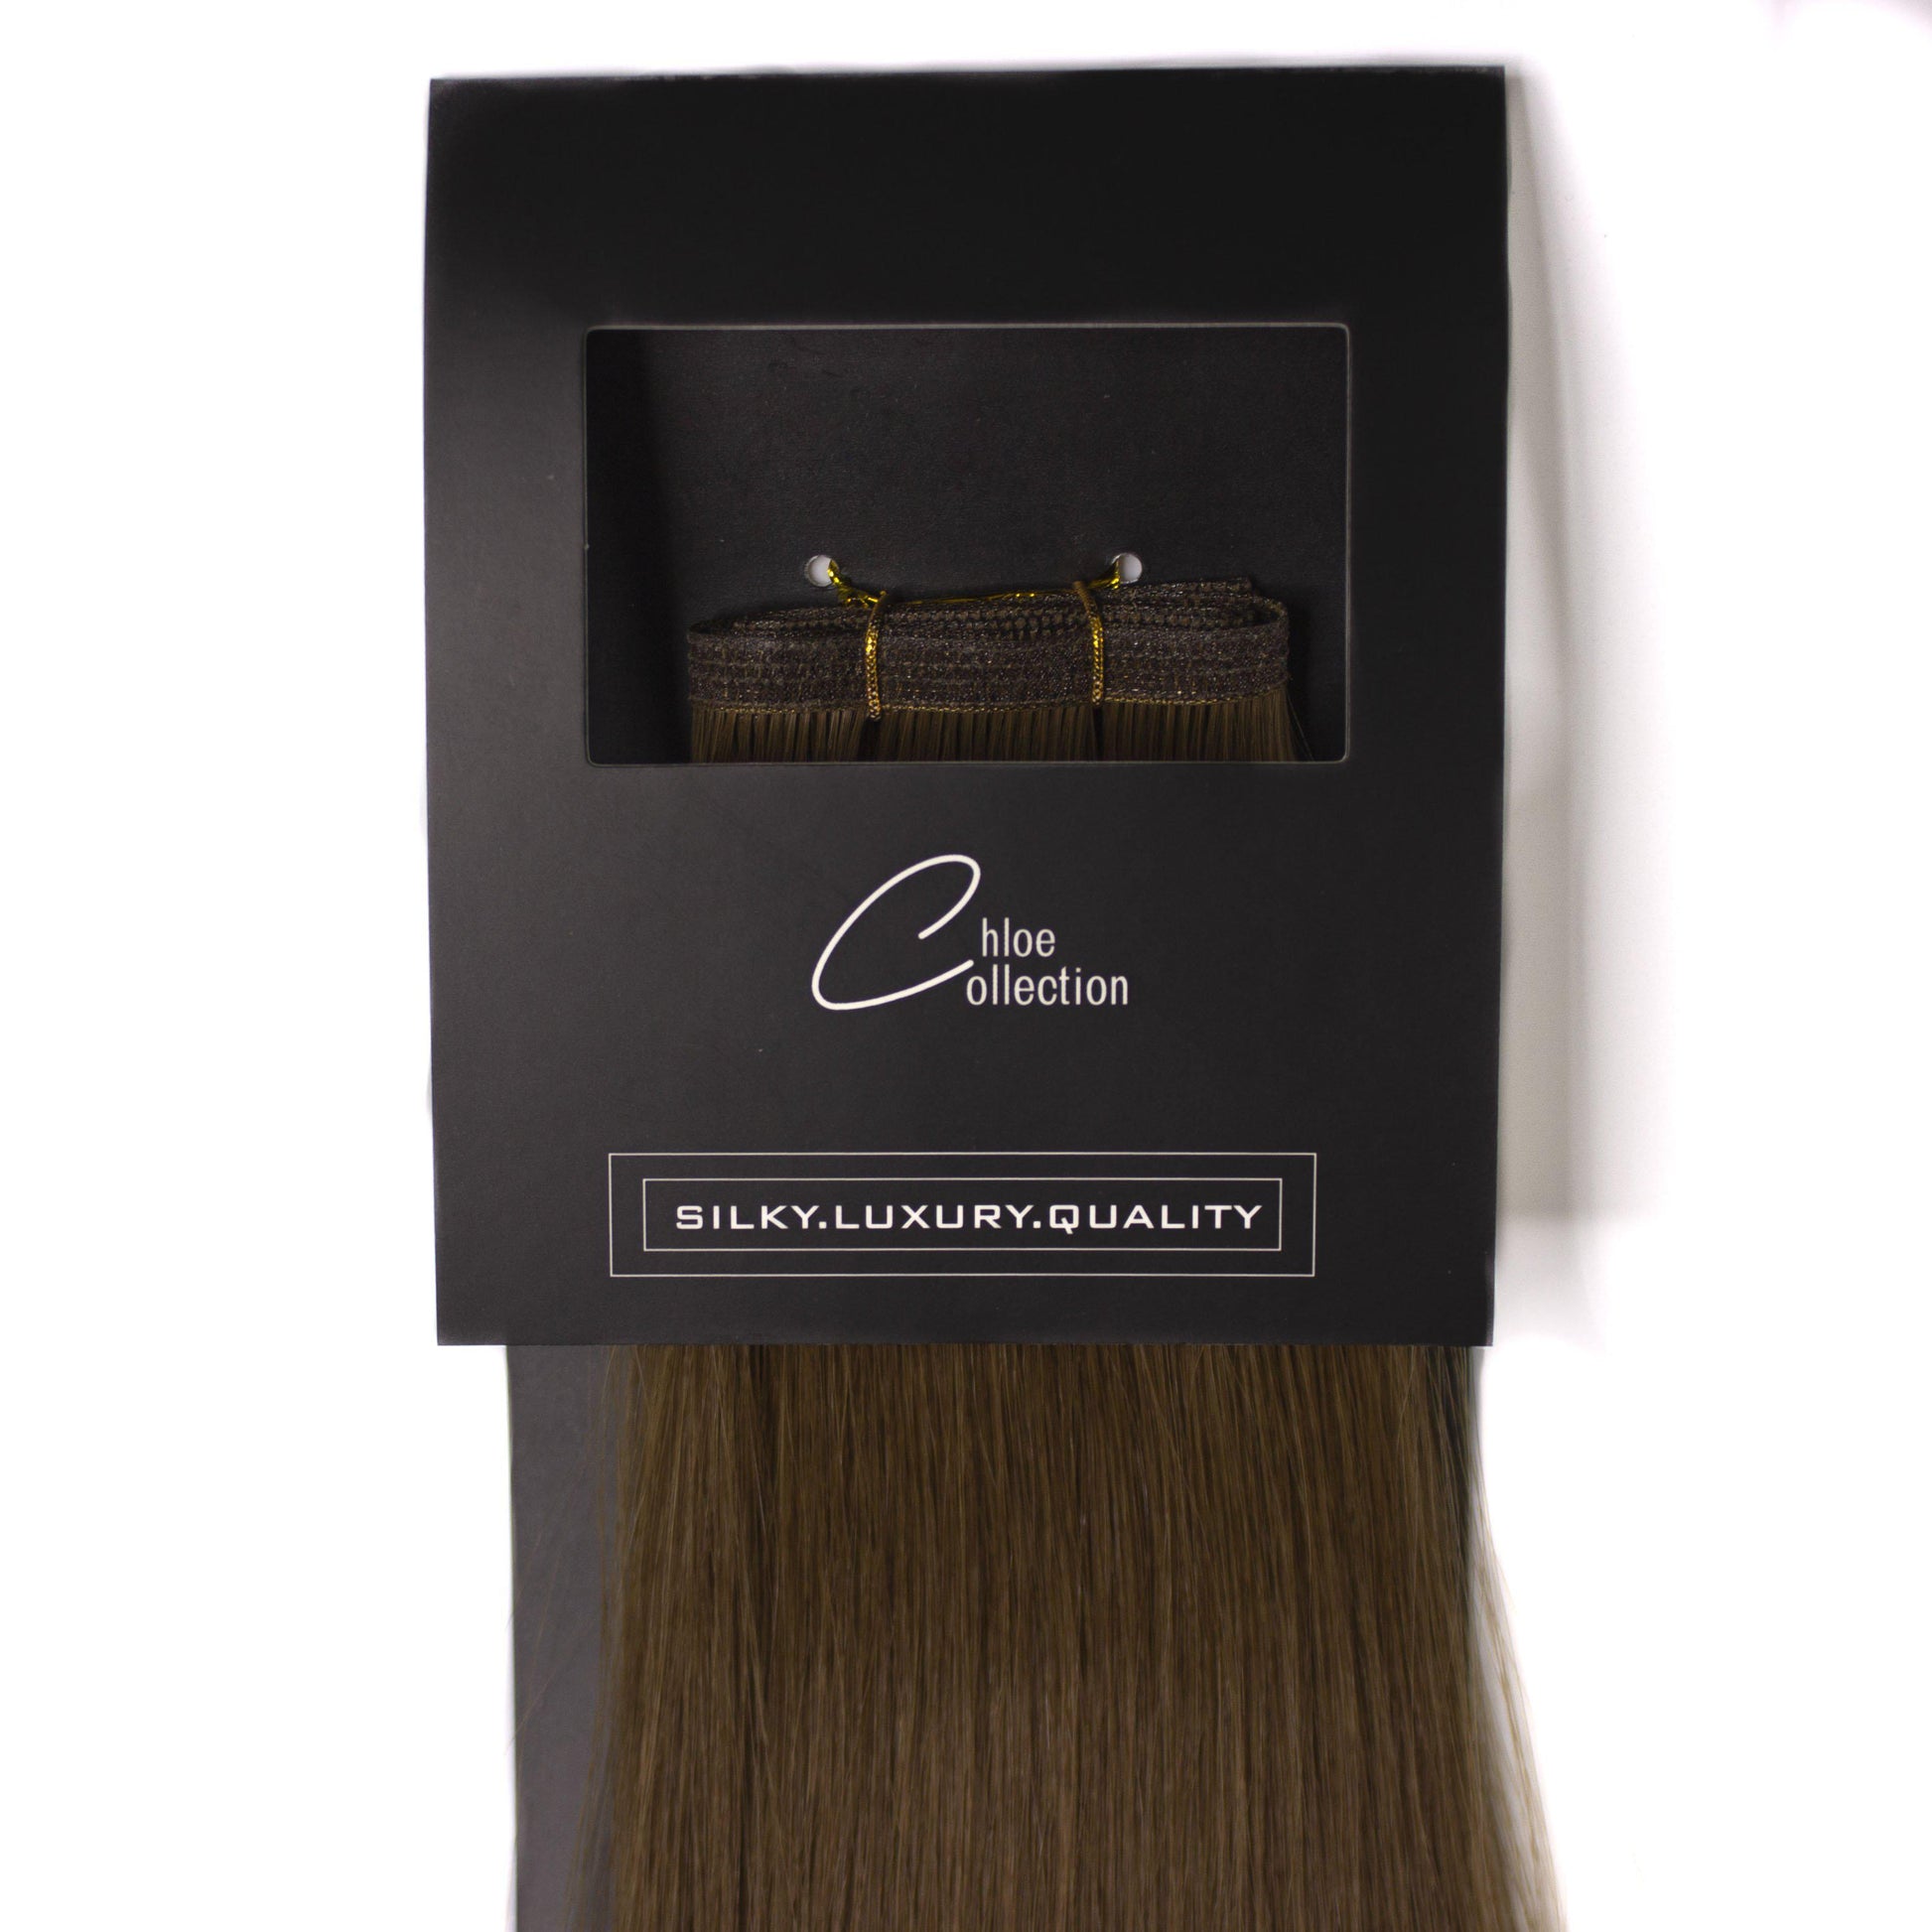 Chloe Collection - Thin weft 18" #6 - 60g.